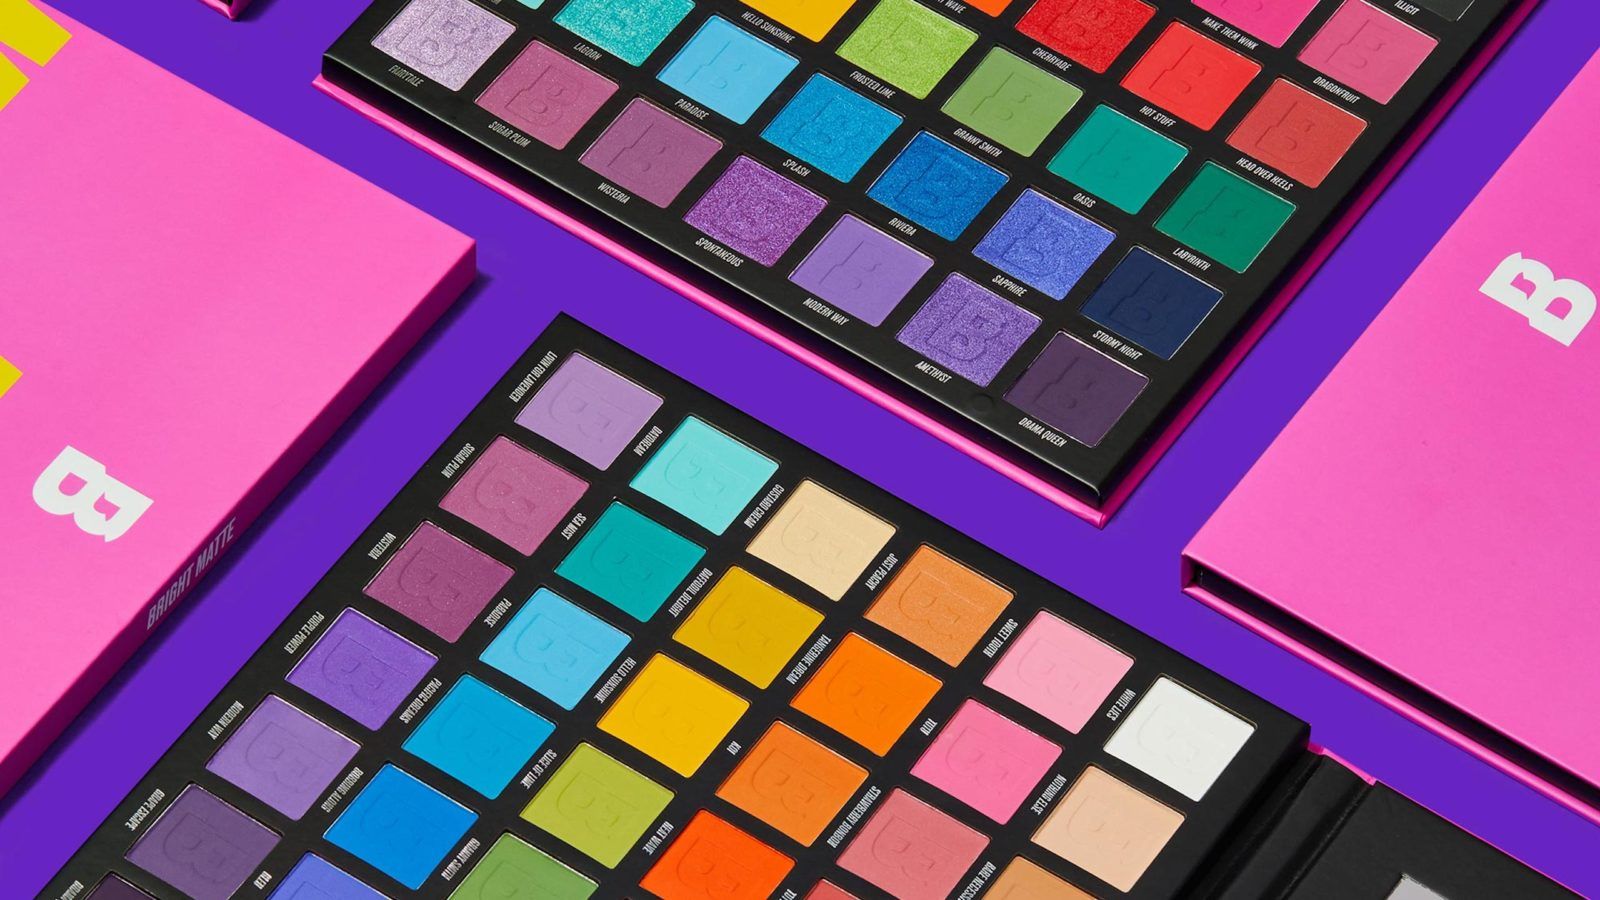 Indie Beauty Brands: 5 colourful eyeshadow palettes I want desperately